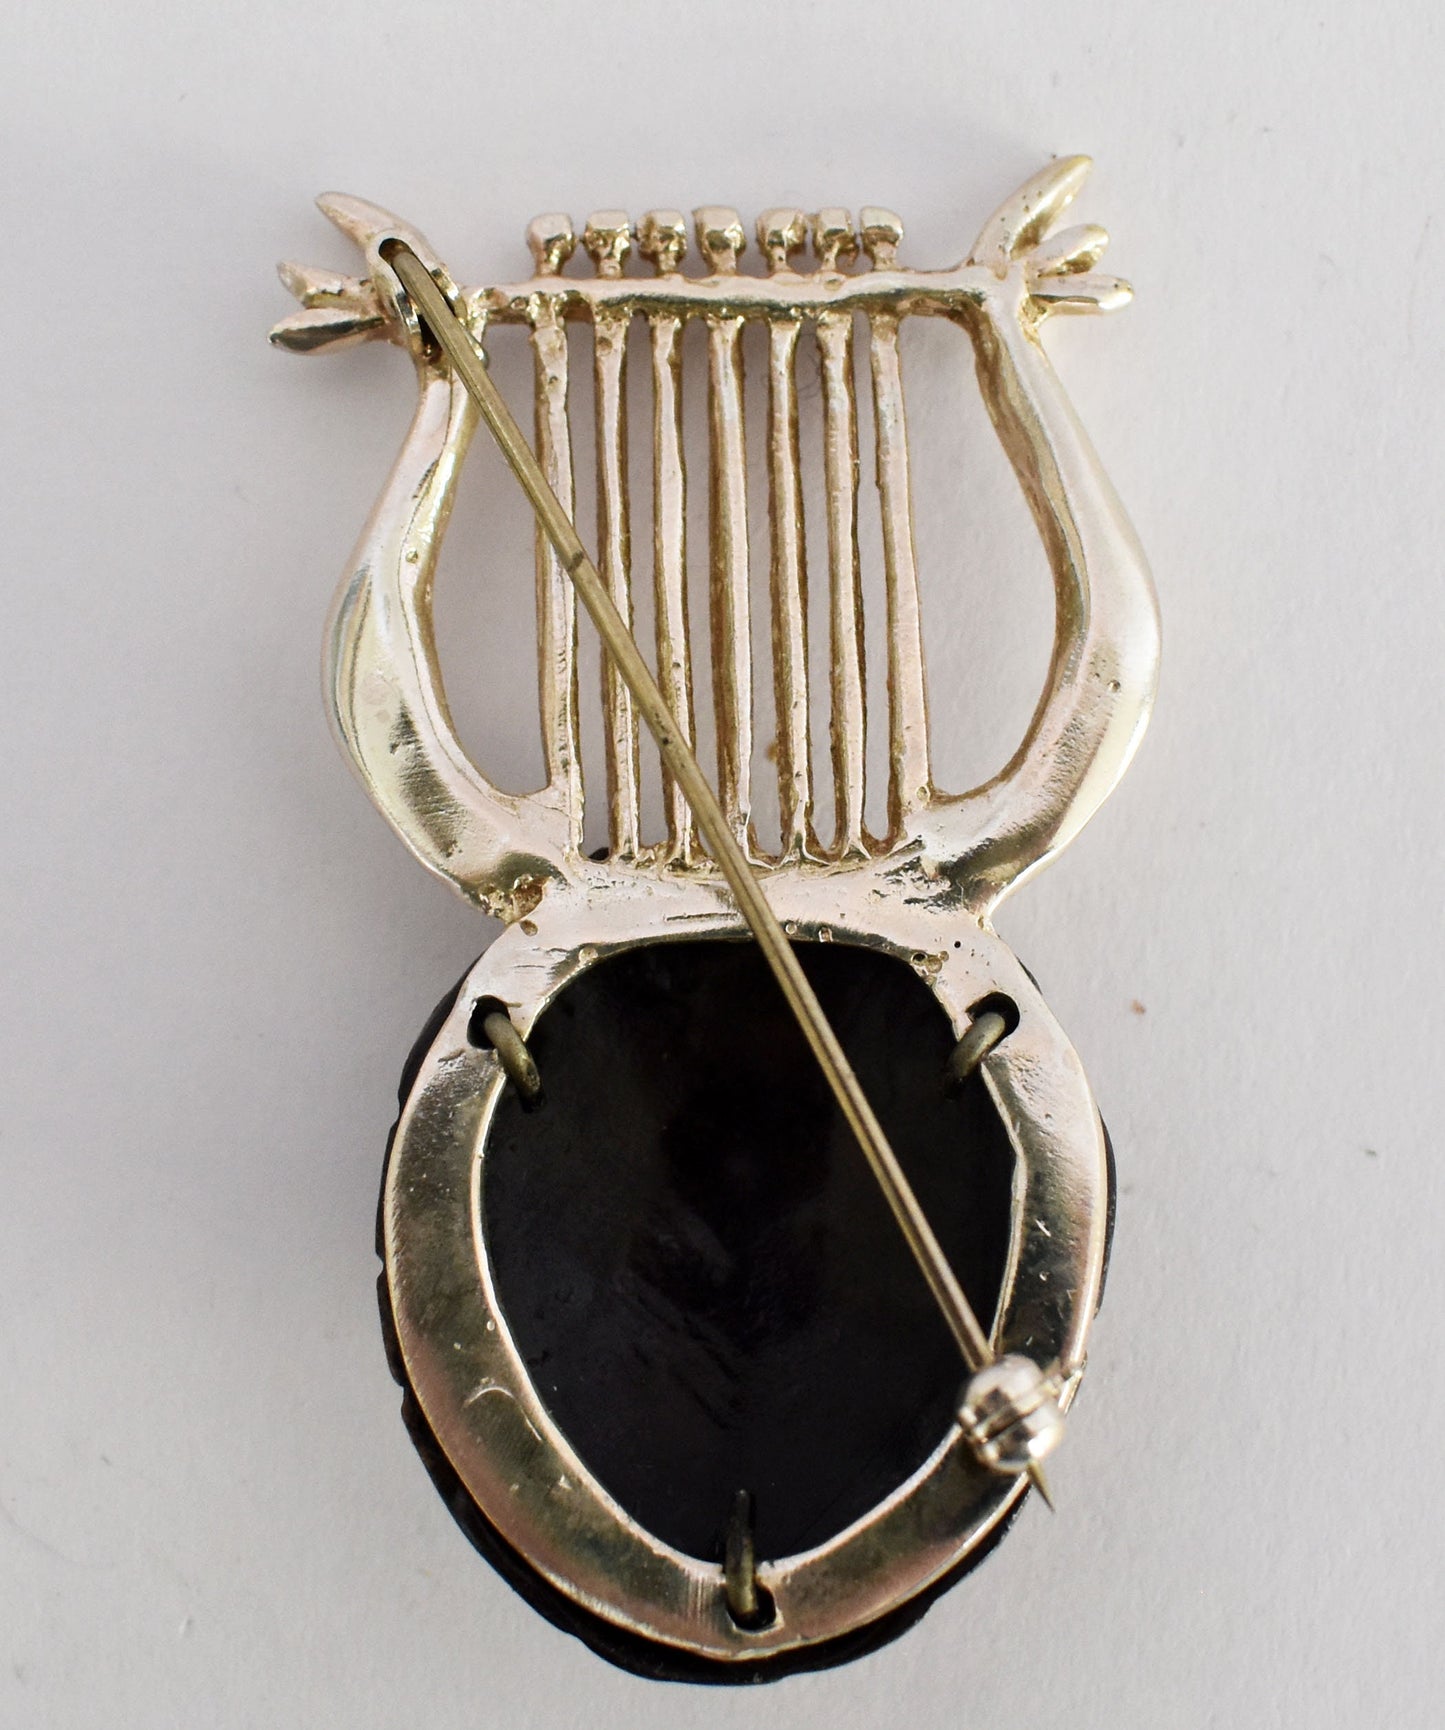 Apollo's Lyre - Musical Instrument Miniature - Ancient Greece  - Brooch Pin - Silver Plated and Bronze Plated Artifact